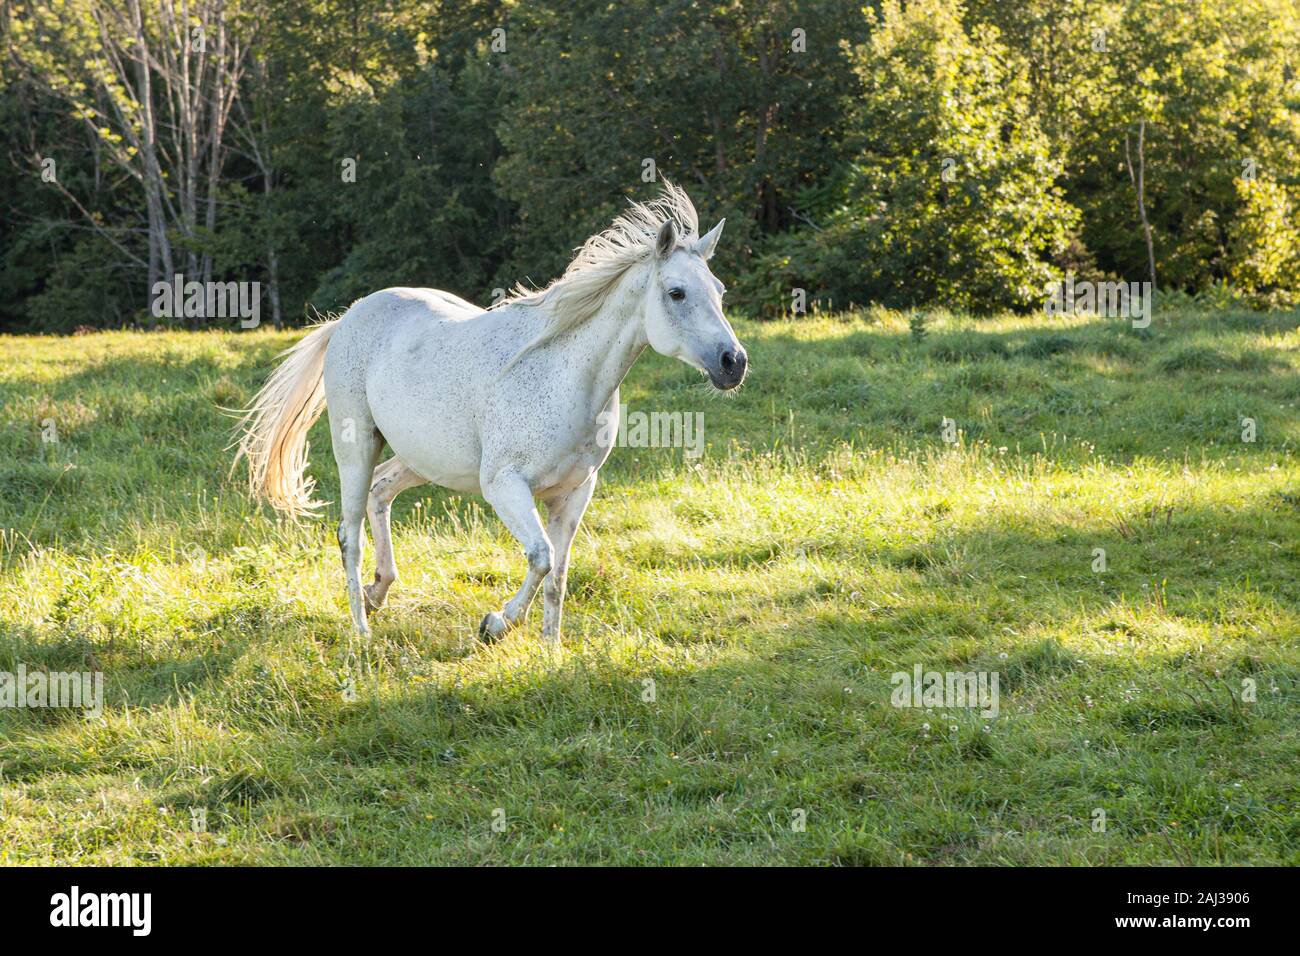 A white horse running through the pasture Stock Photo